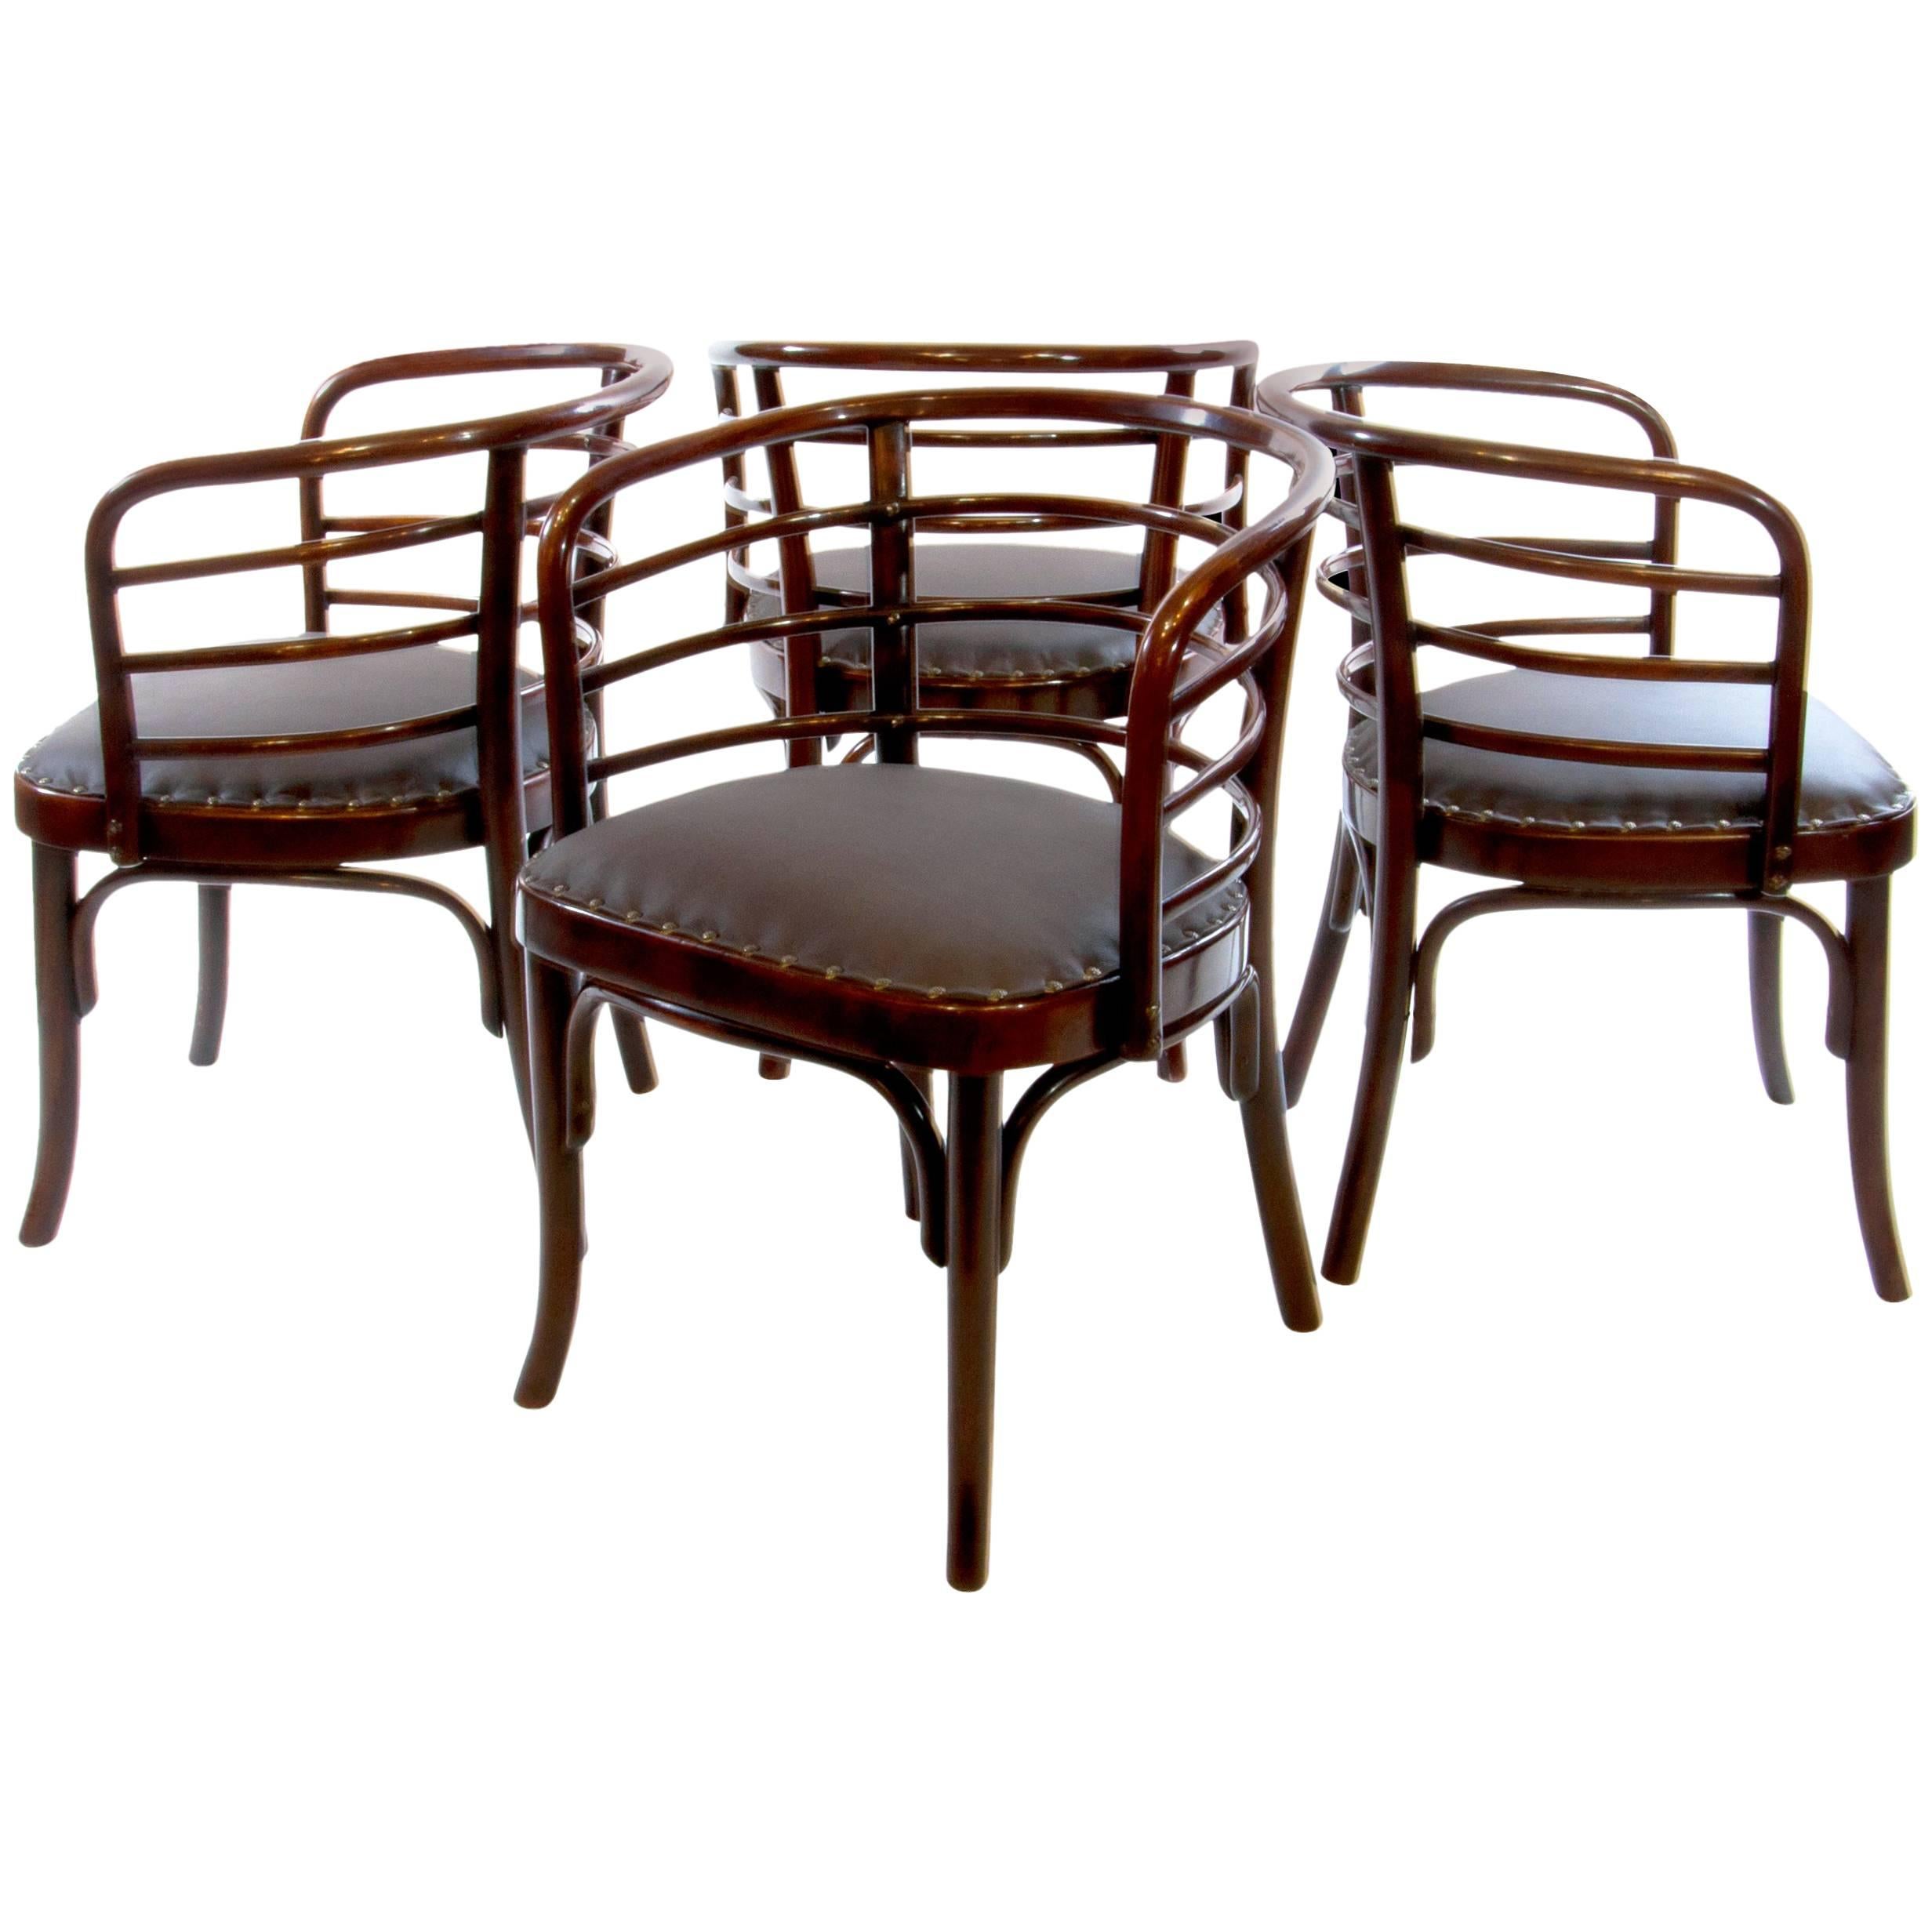 Set of Four Josef Frank Bentwod Dinner Armchairs for Thonet, 1930 For Sale